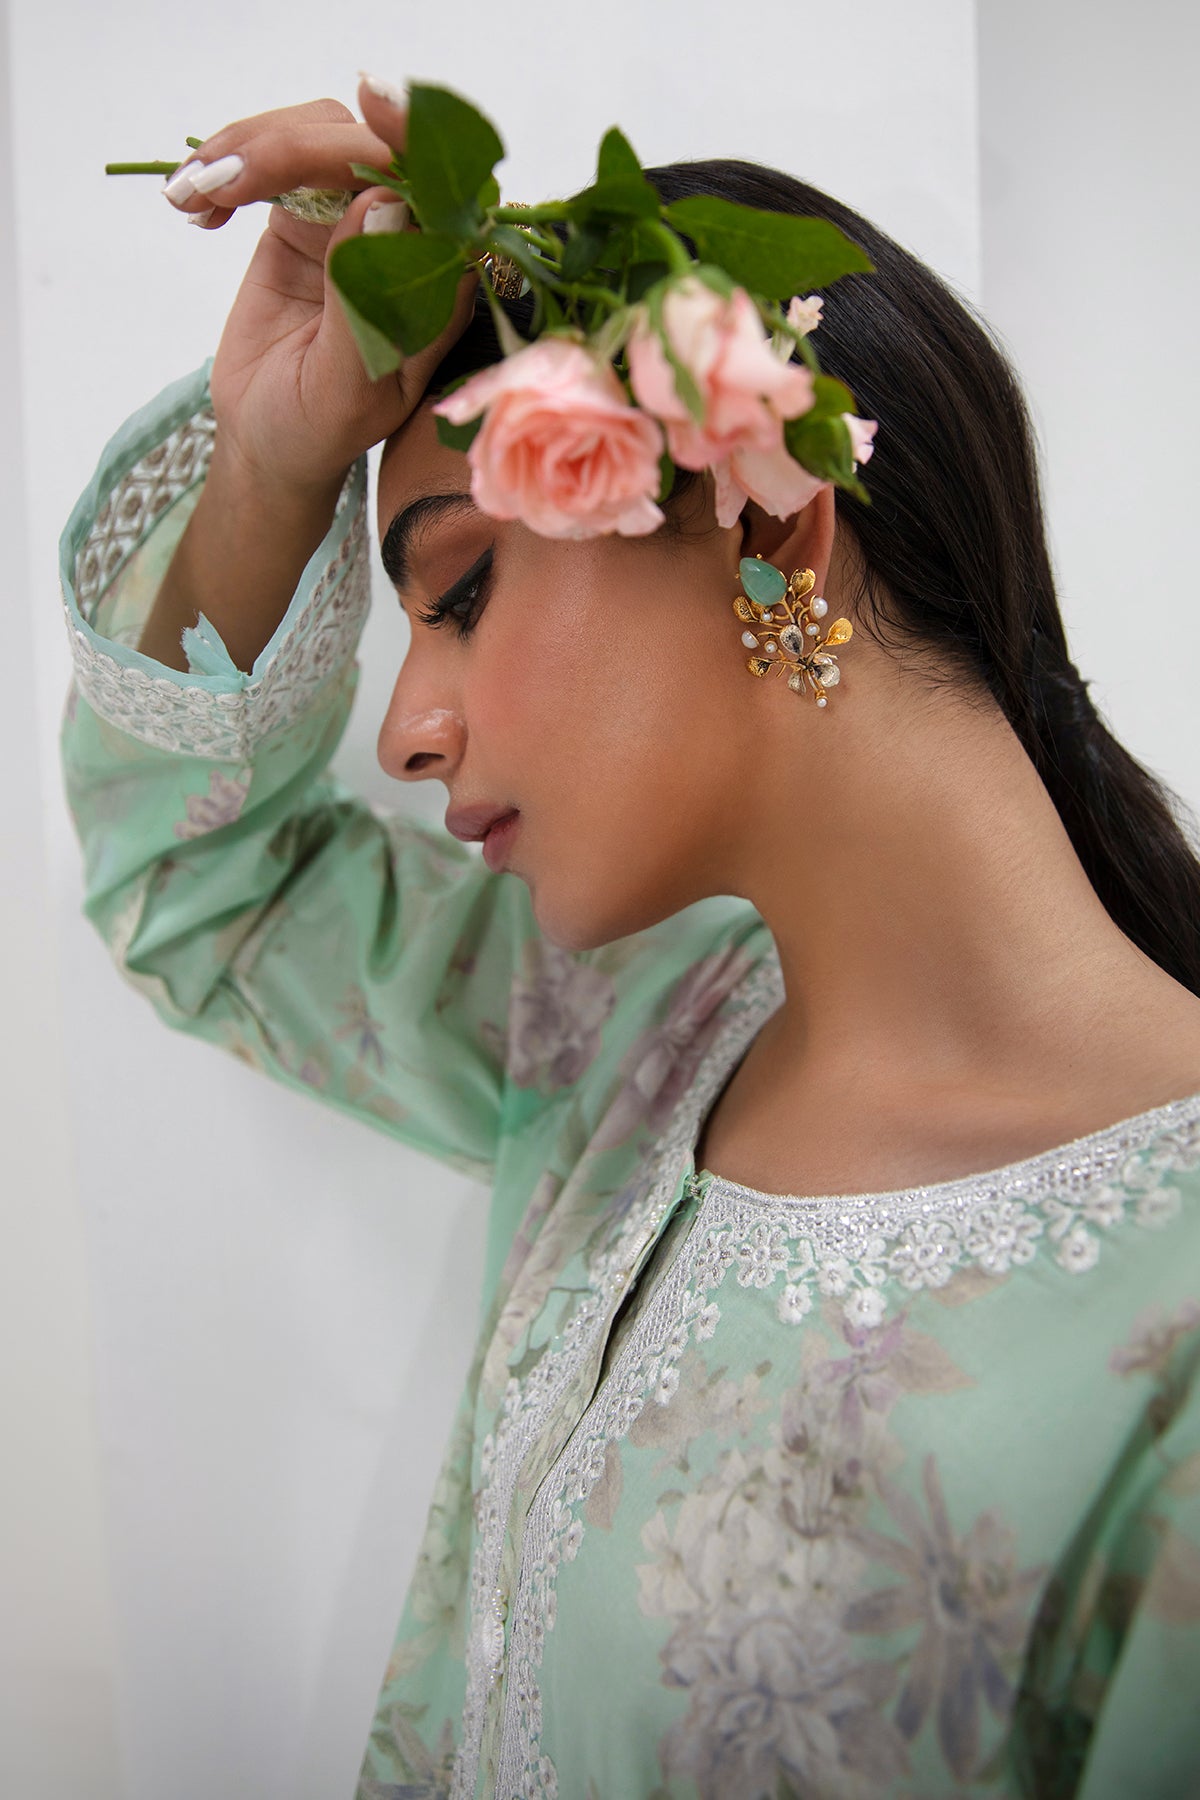 EMBROIDERED LAWN PR-819